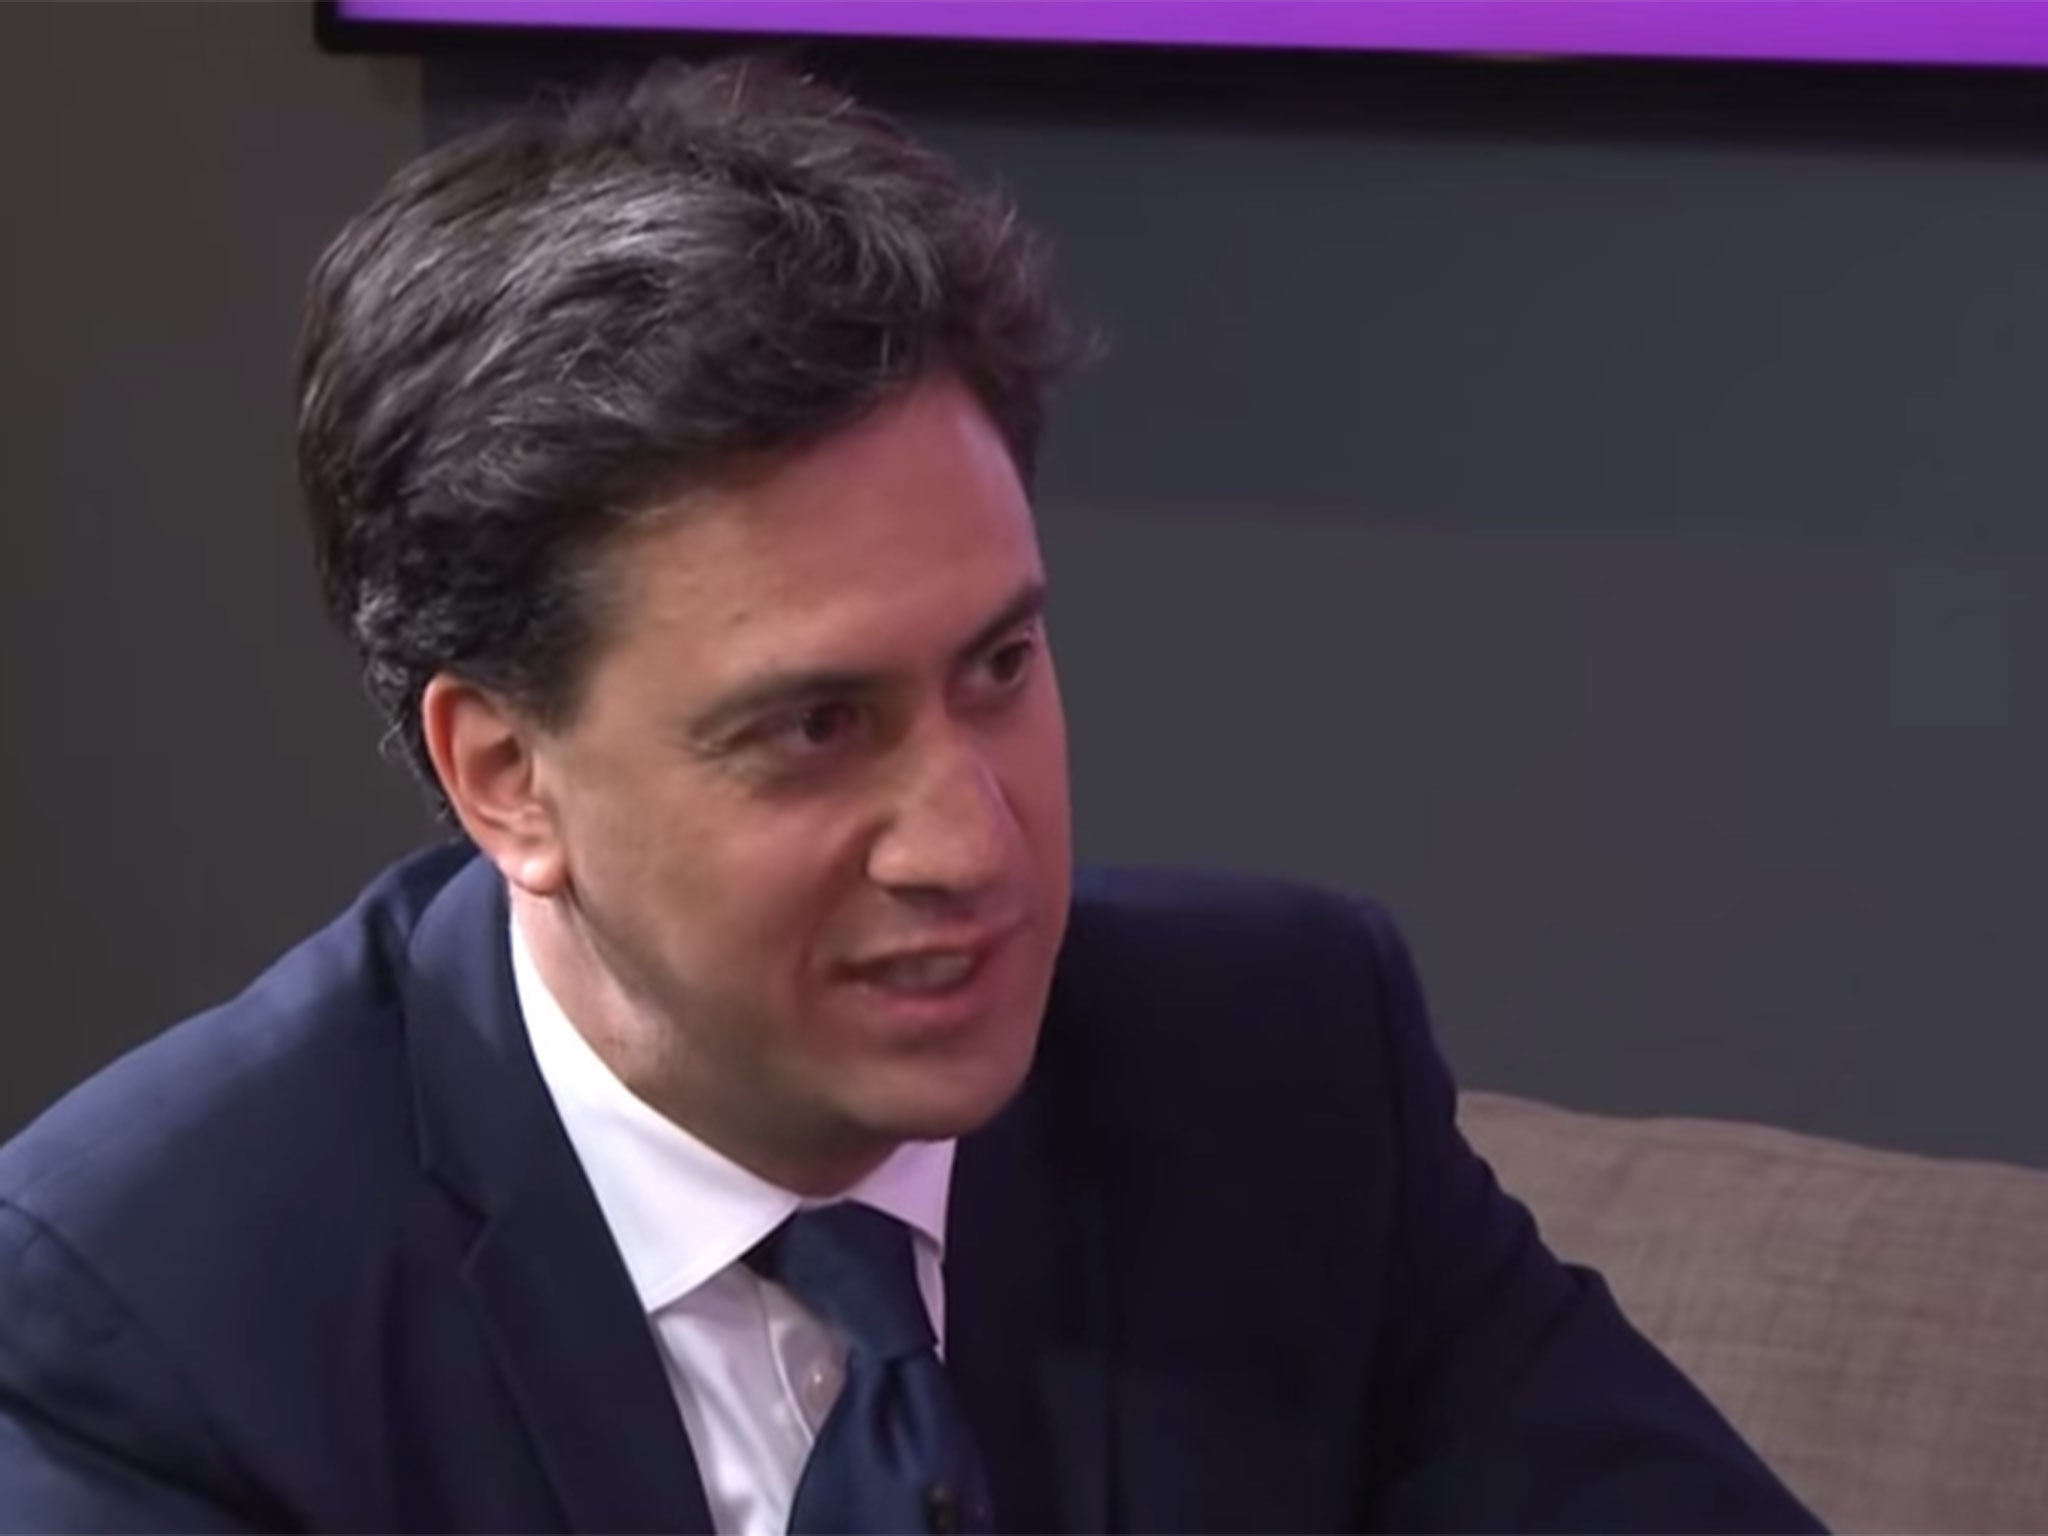 Ed Miliband looking very normal indeed during an impressive performance on Absolute Radio